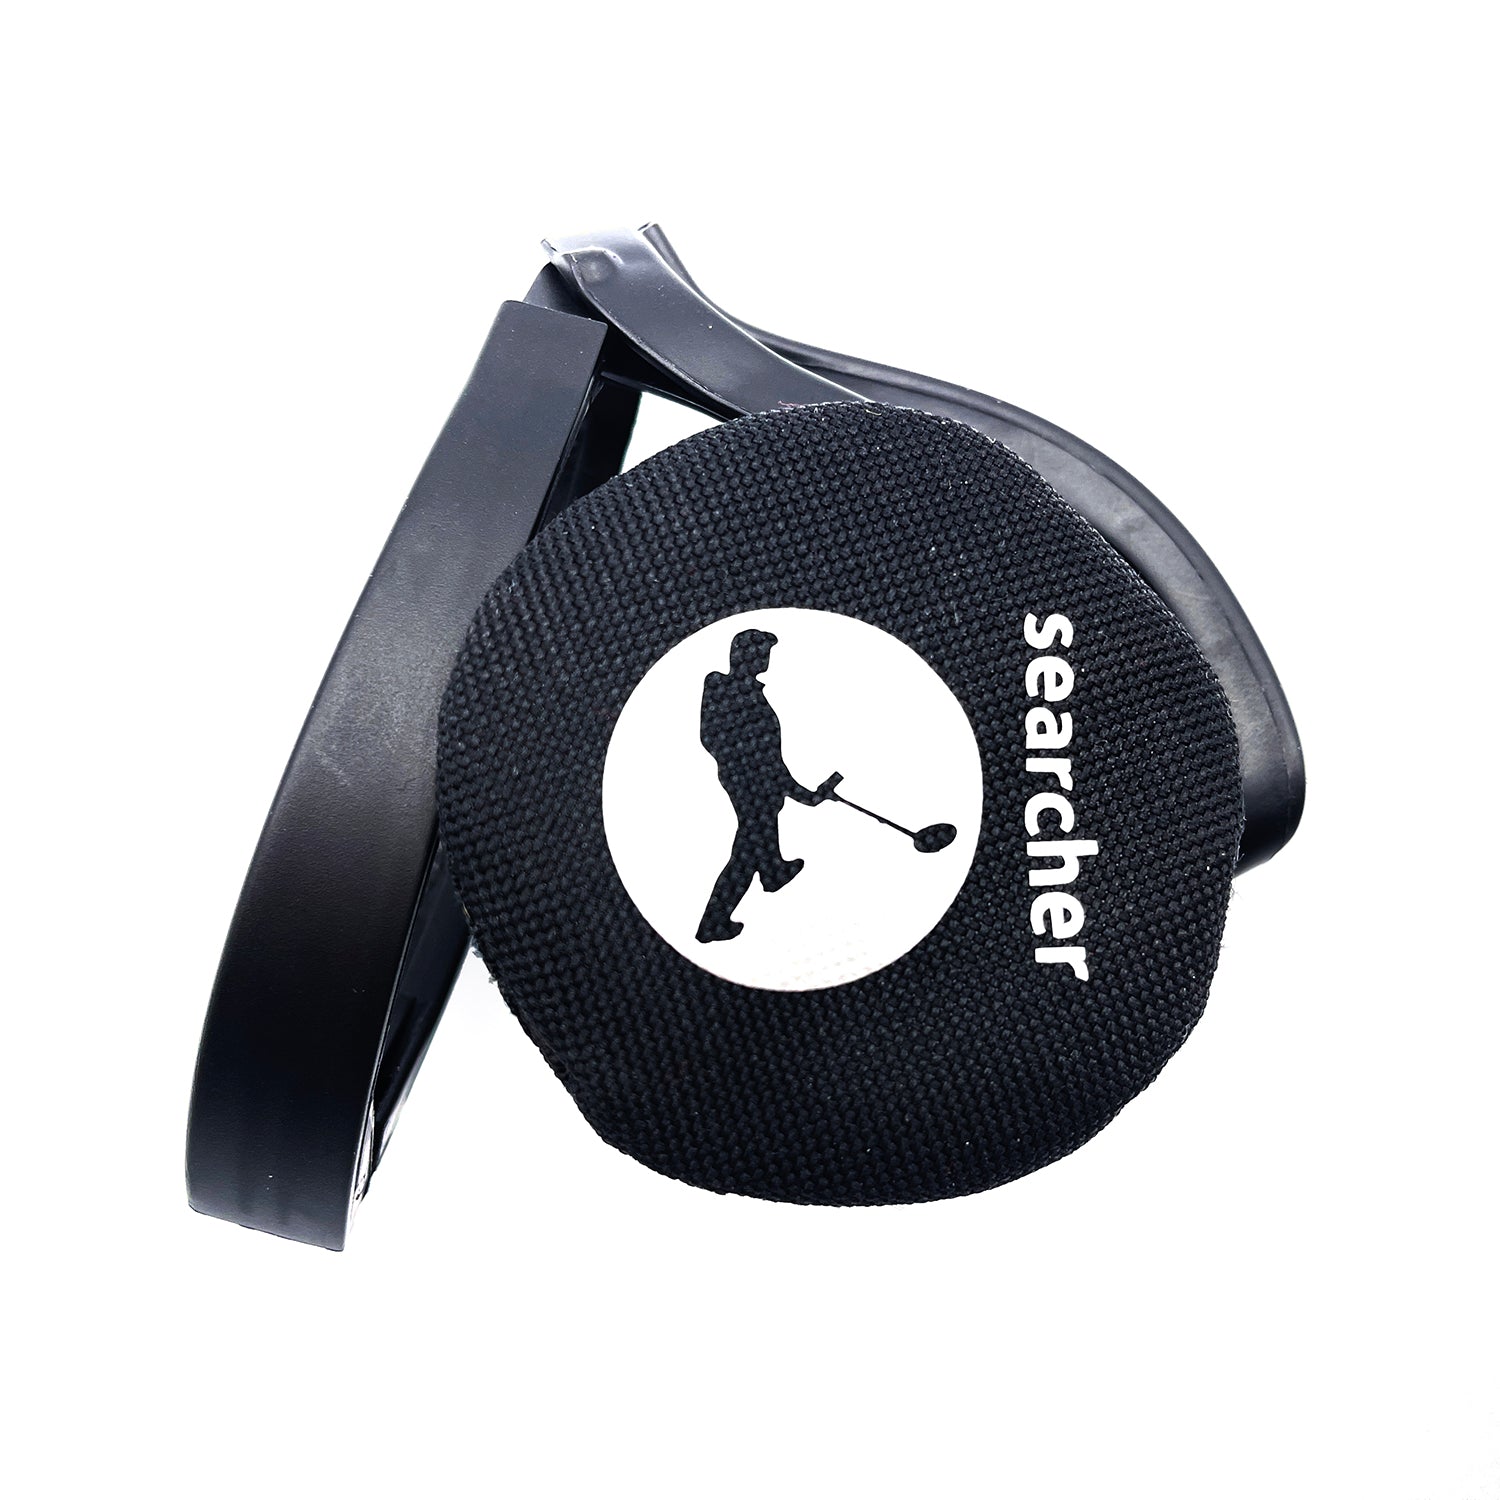 Searcher WS4/6 headphone covers